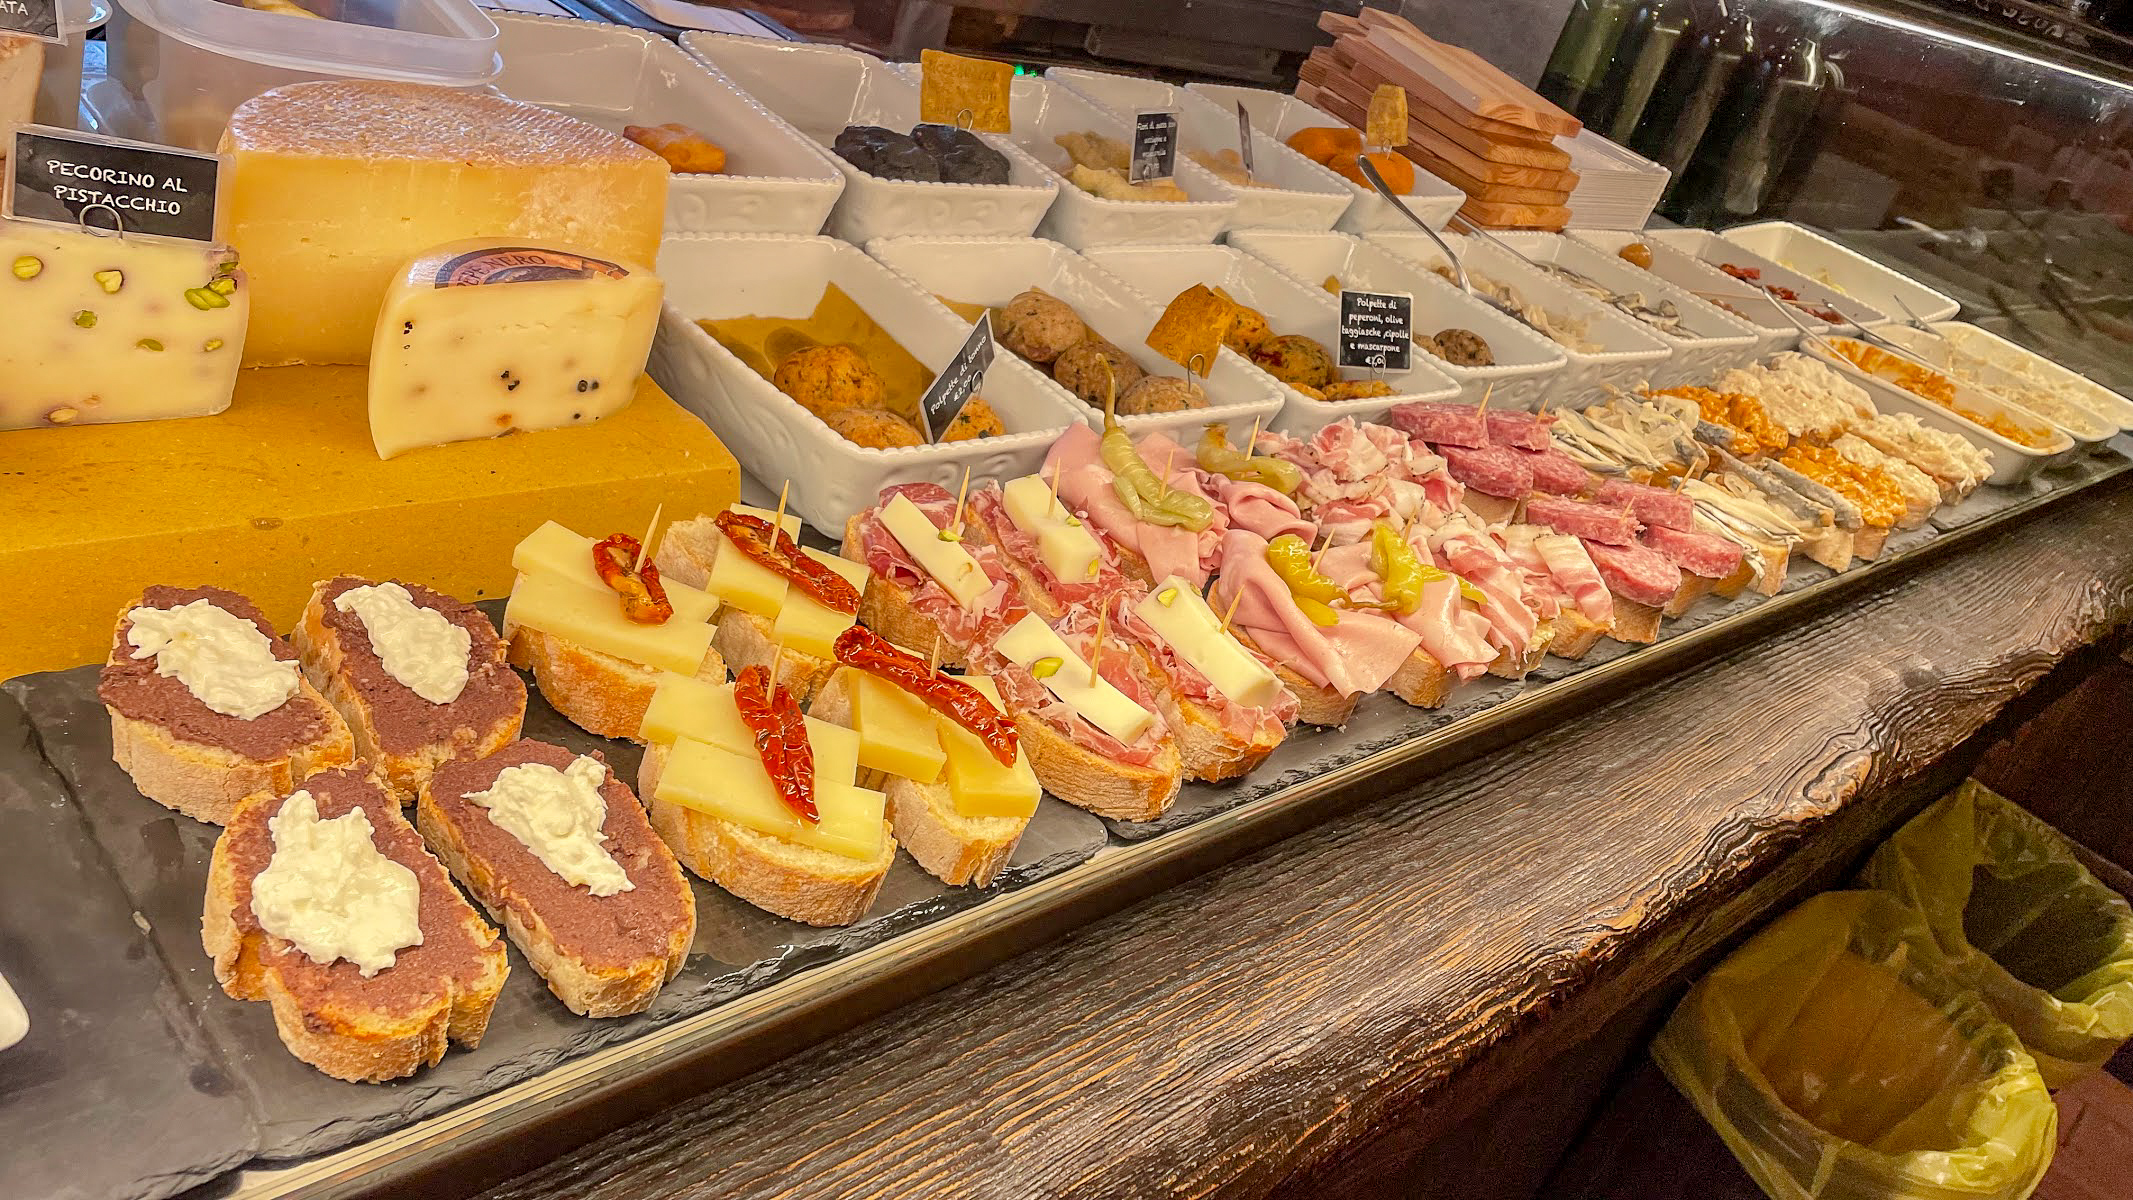 Cicchetti and Chats - Eatwith Venice Food Tour Review